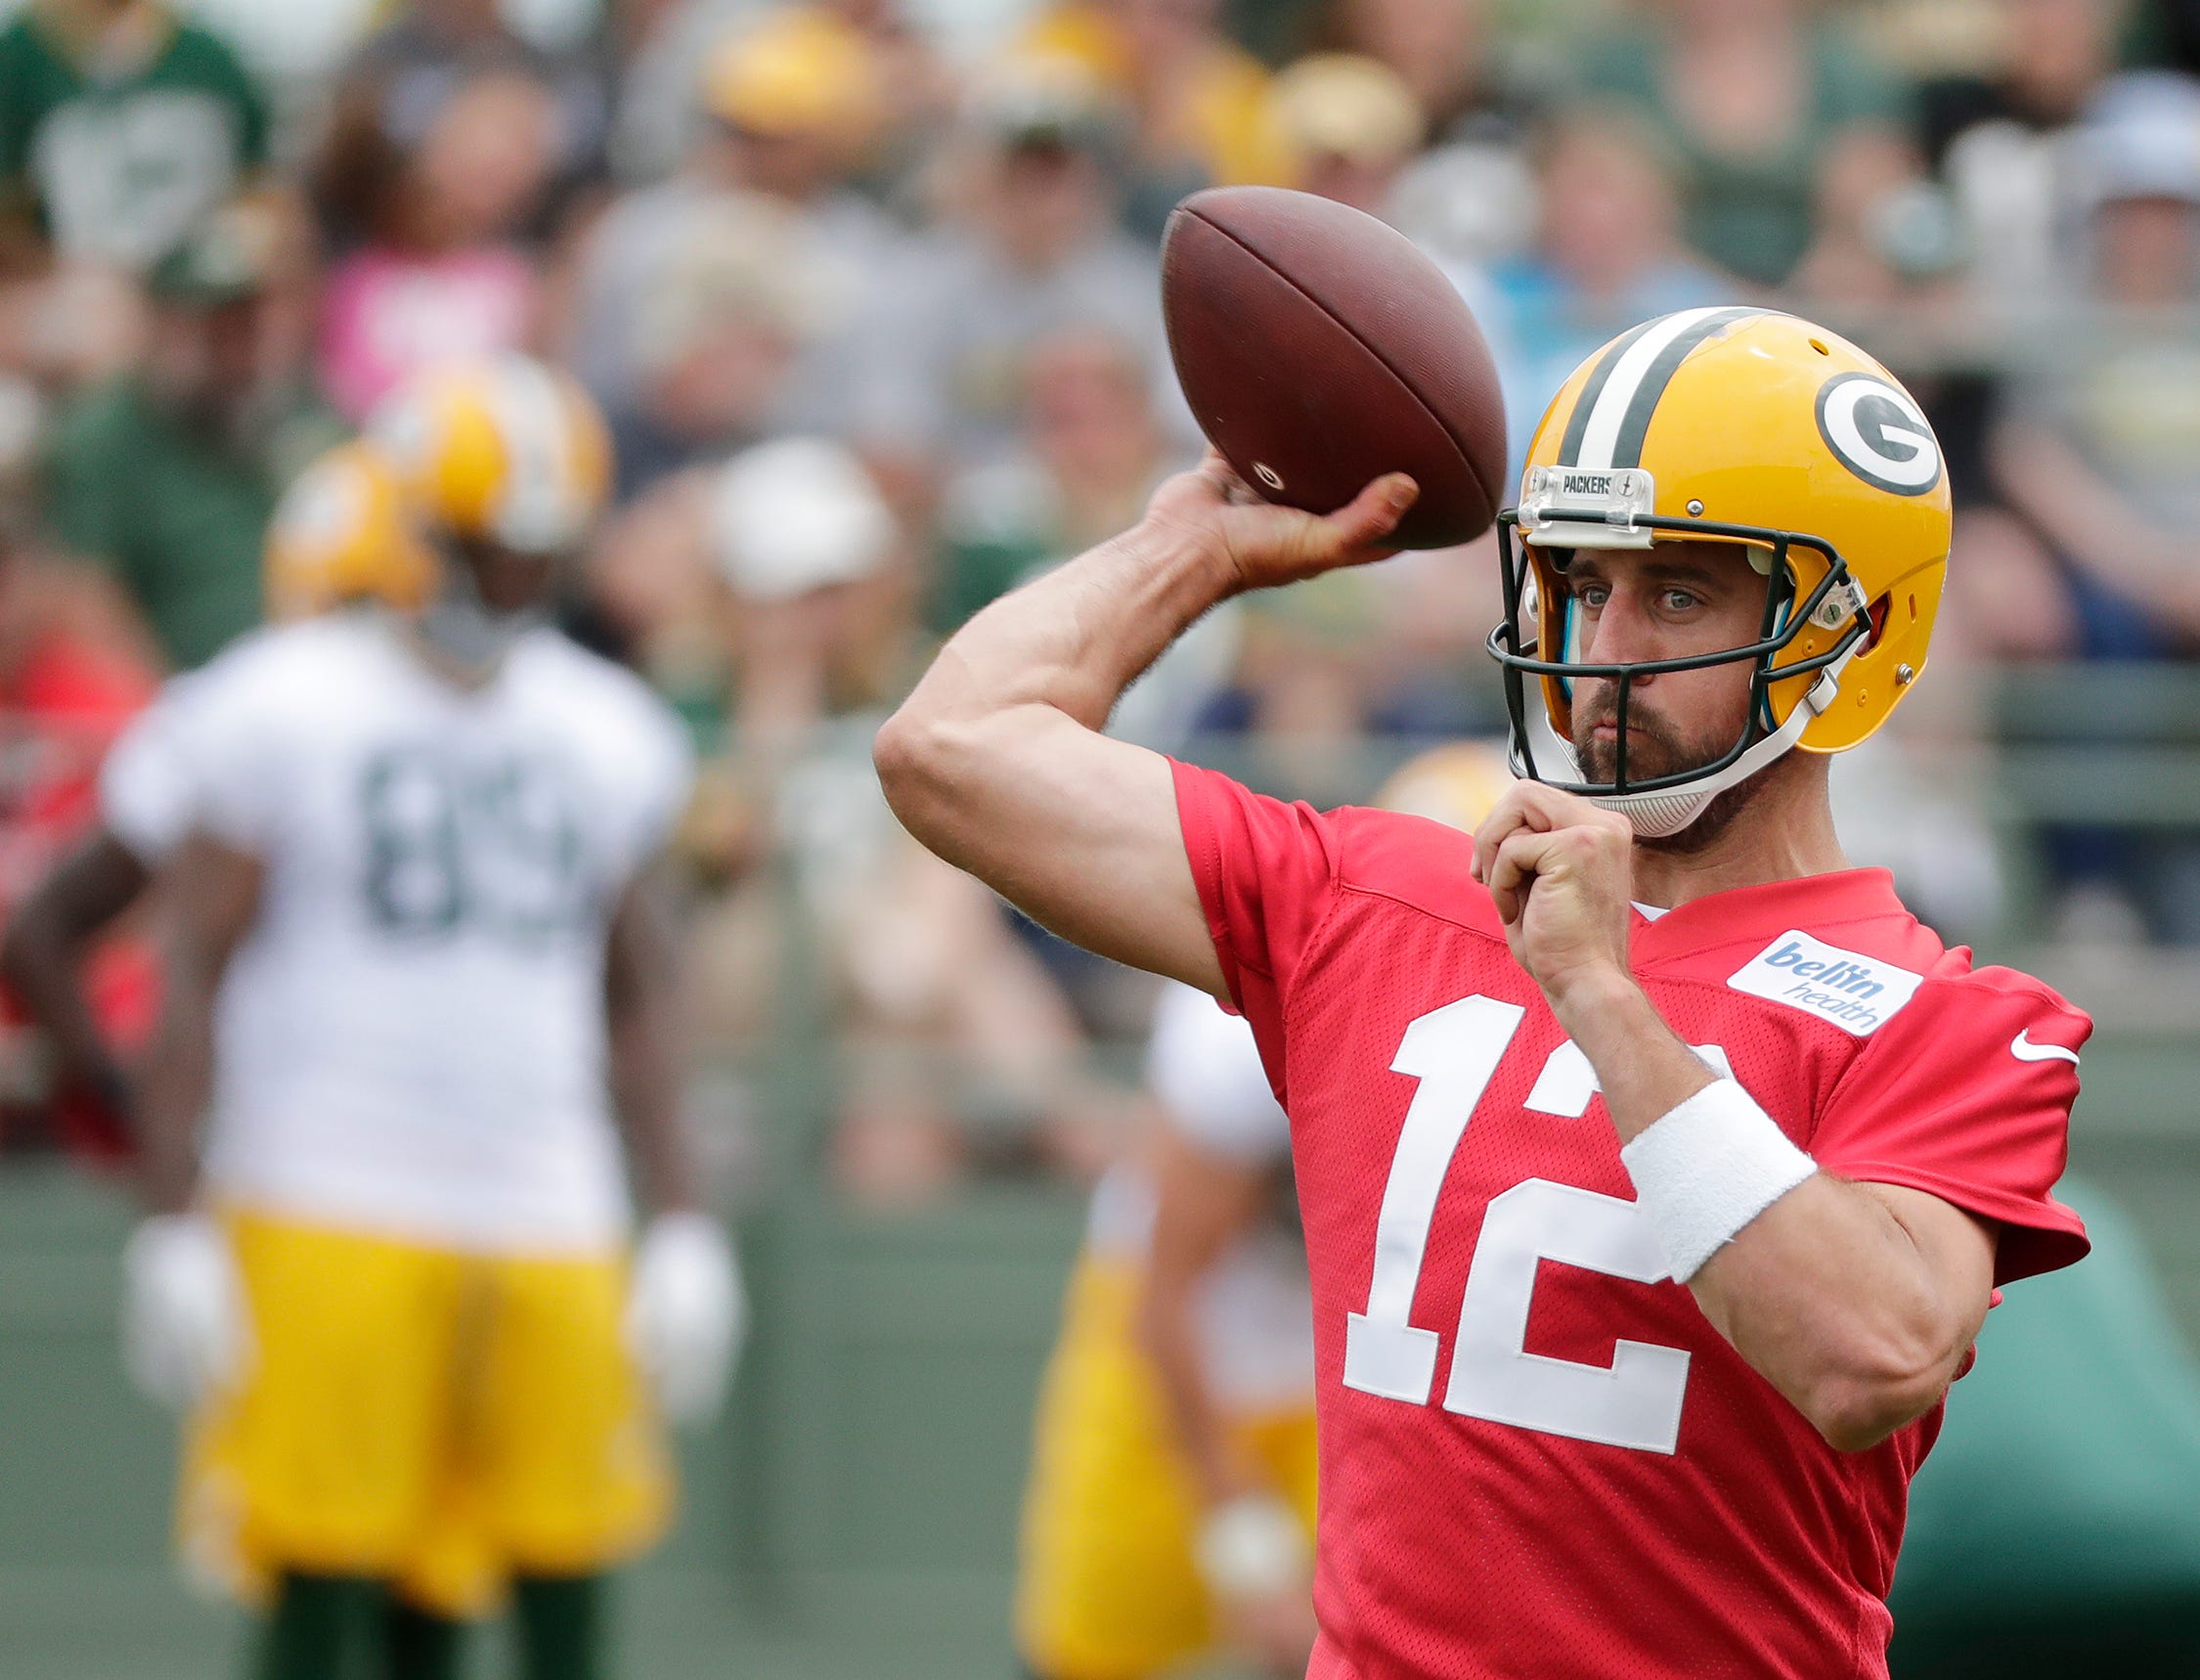 Green Bay Packers quarterback Aaron Rodgers (12) throws during training camp practice at Ray Nitschke Field on Thursday, July 26, 2018 in Ashwaubenon, Wis. 
Adam Wesley/USA TODAY NETWORK-Wisconsin